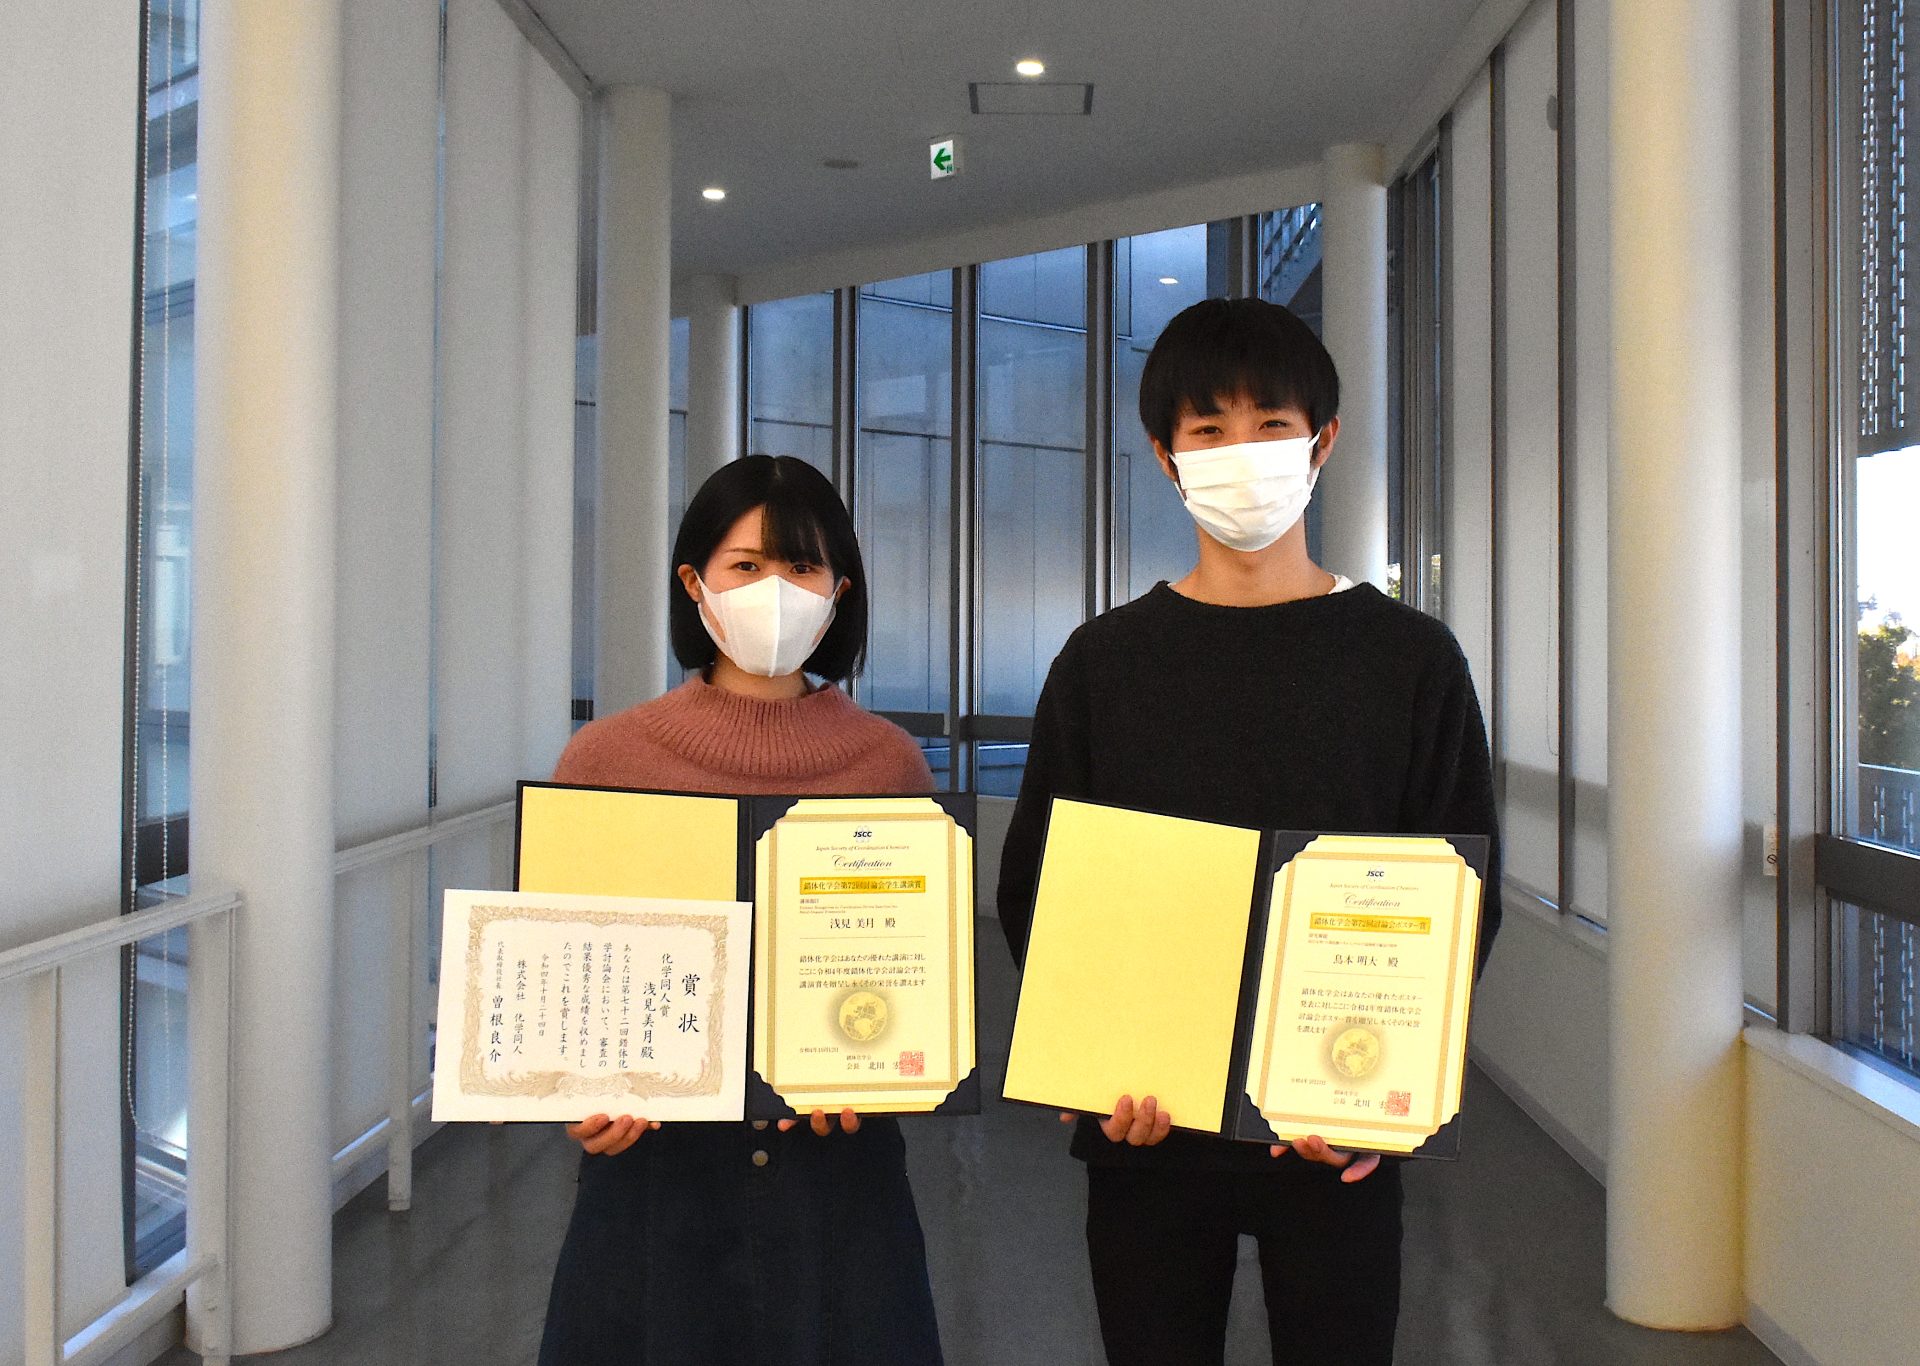 Asami and Torimoto won the Student Lecture Award and the Poster Award, respectively, at the 72nd Conference of Japan Society of Coordination Chemistry (JSCC).